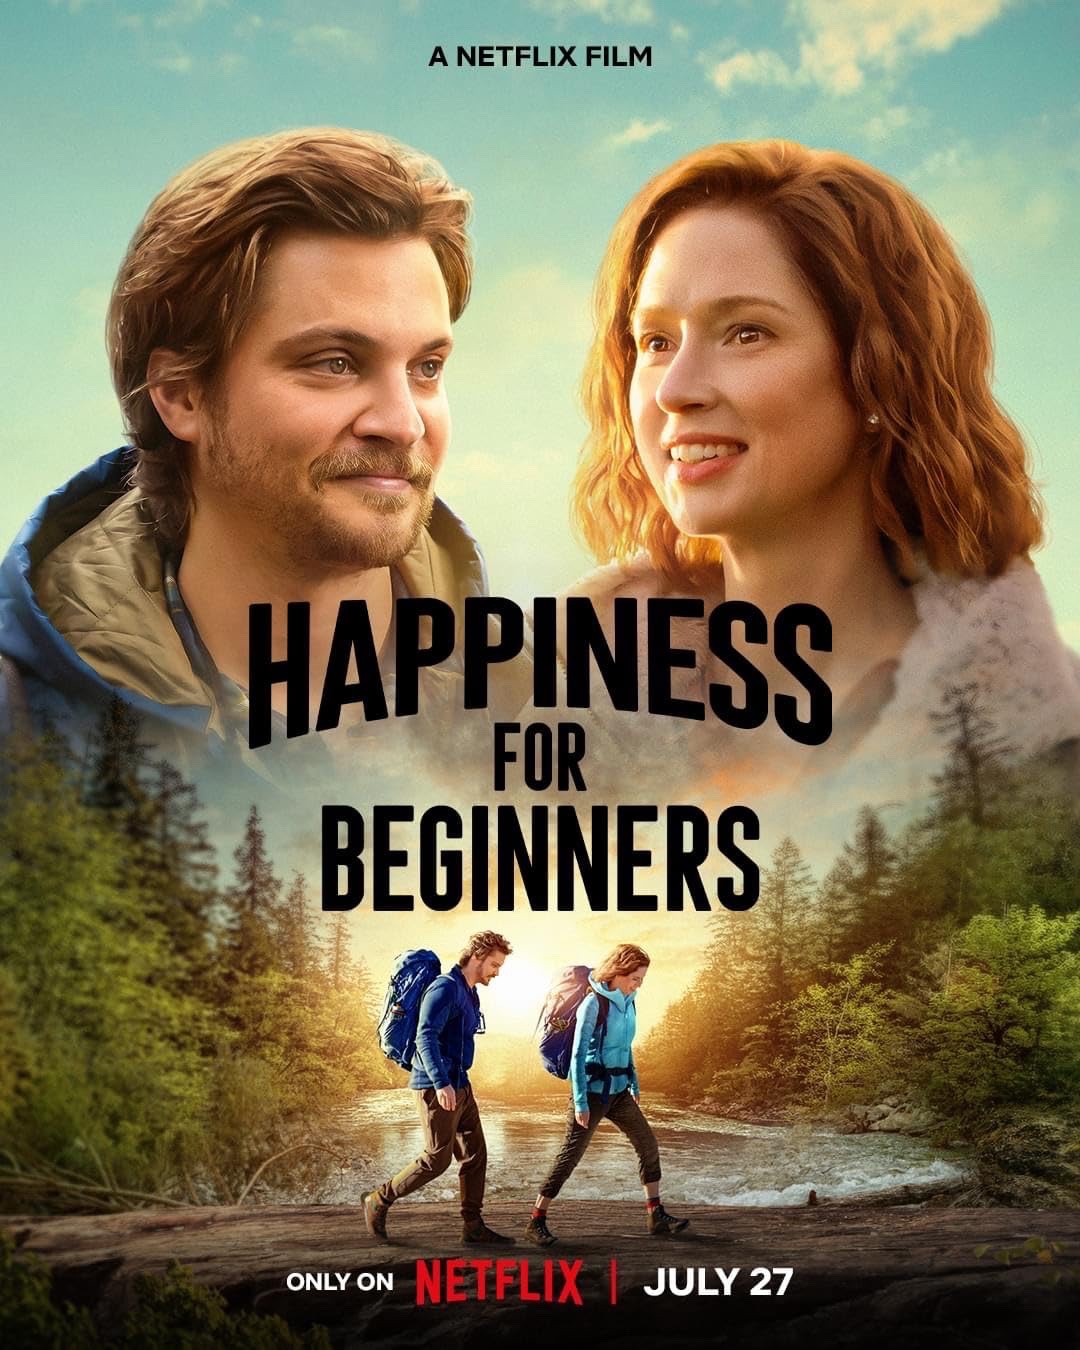 Happiness for Beginners: From About Schmidt to Unbreakable Kimmy Schmidt